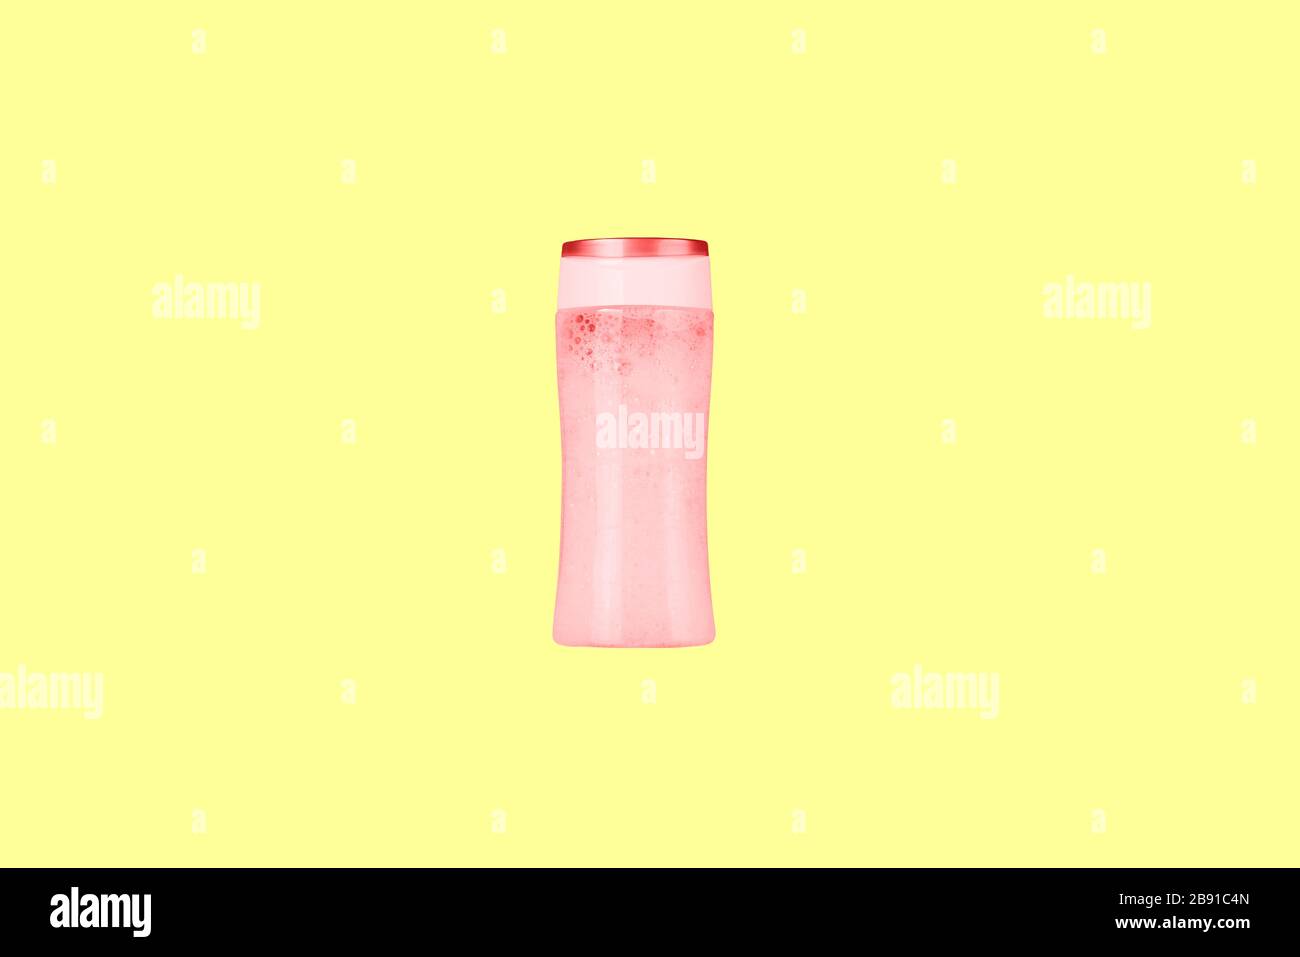 Red plastic bottle with shampoo. Shampoo bottle on a yellow background. Cosmetic product for washing hair and hands without a label Stock Photo